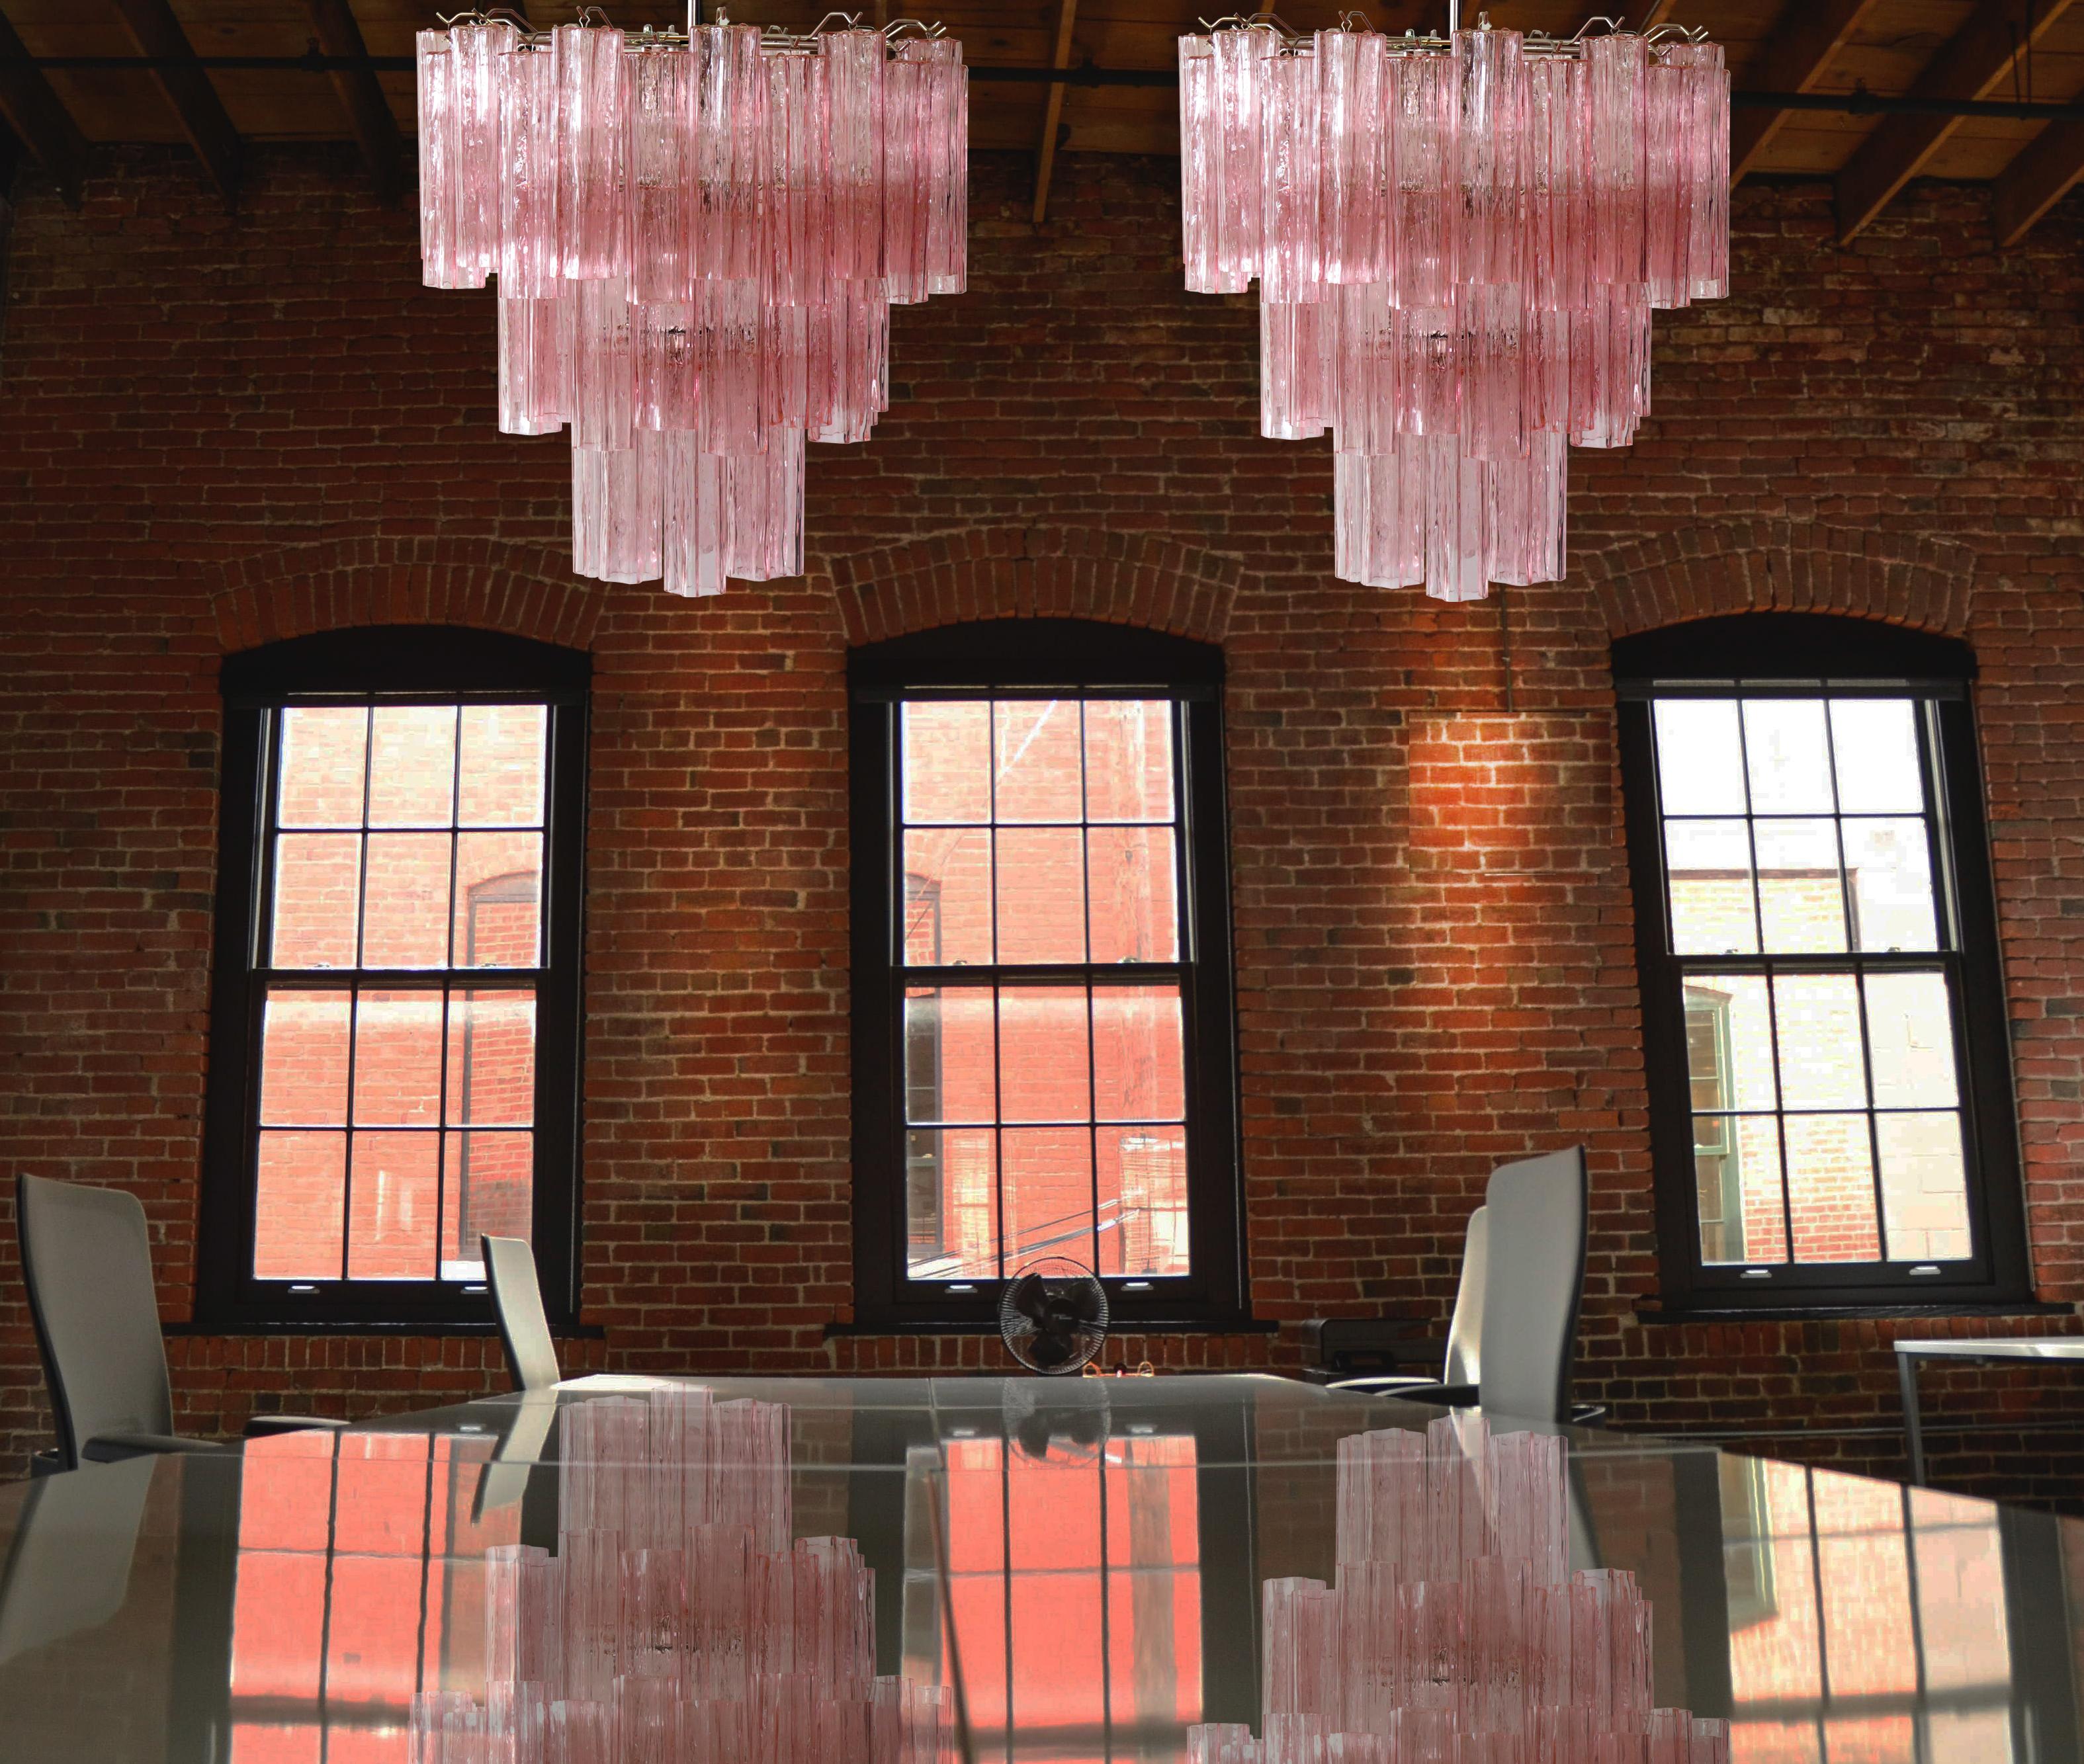 Pair of three-tier Murano glass tube chandeliers, 48 pink glasses, Mid-Century Modern
Italian vintage chandelier in Murano glass and nickel-plated metal structure. The armour polished nickel supports 48 large pink glass tubes in a star shape. The